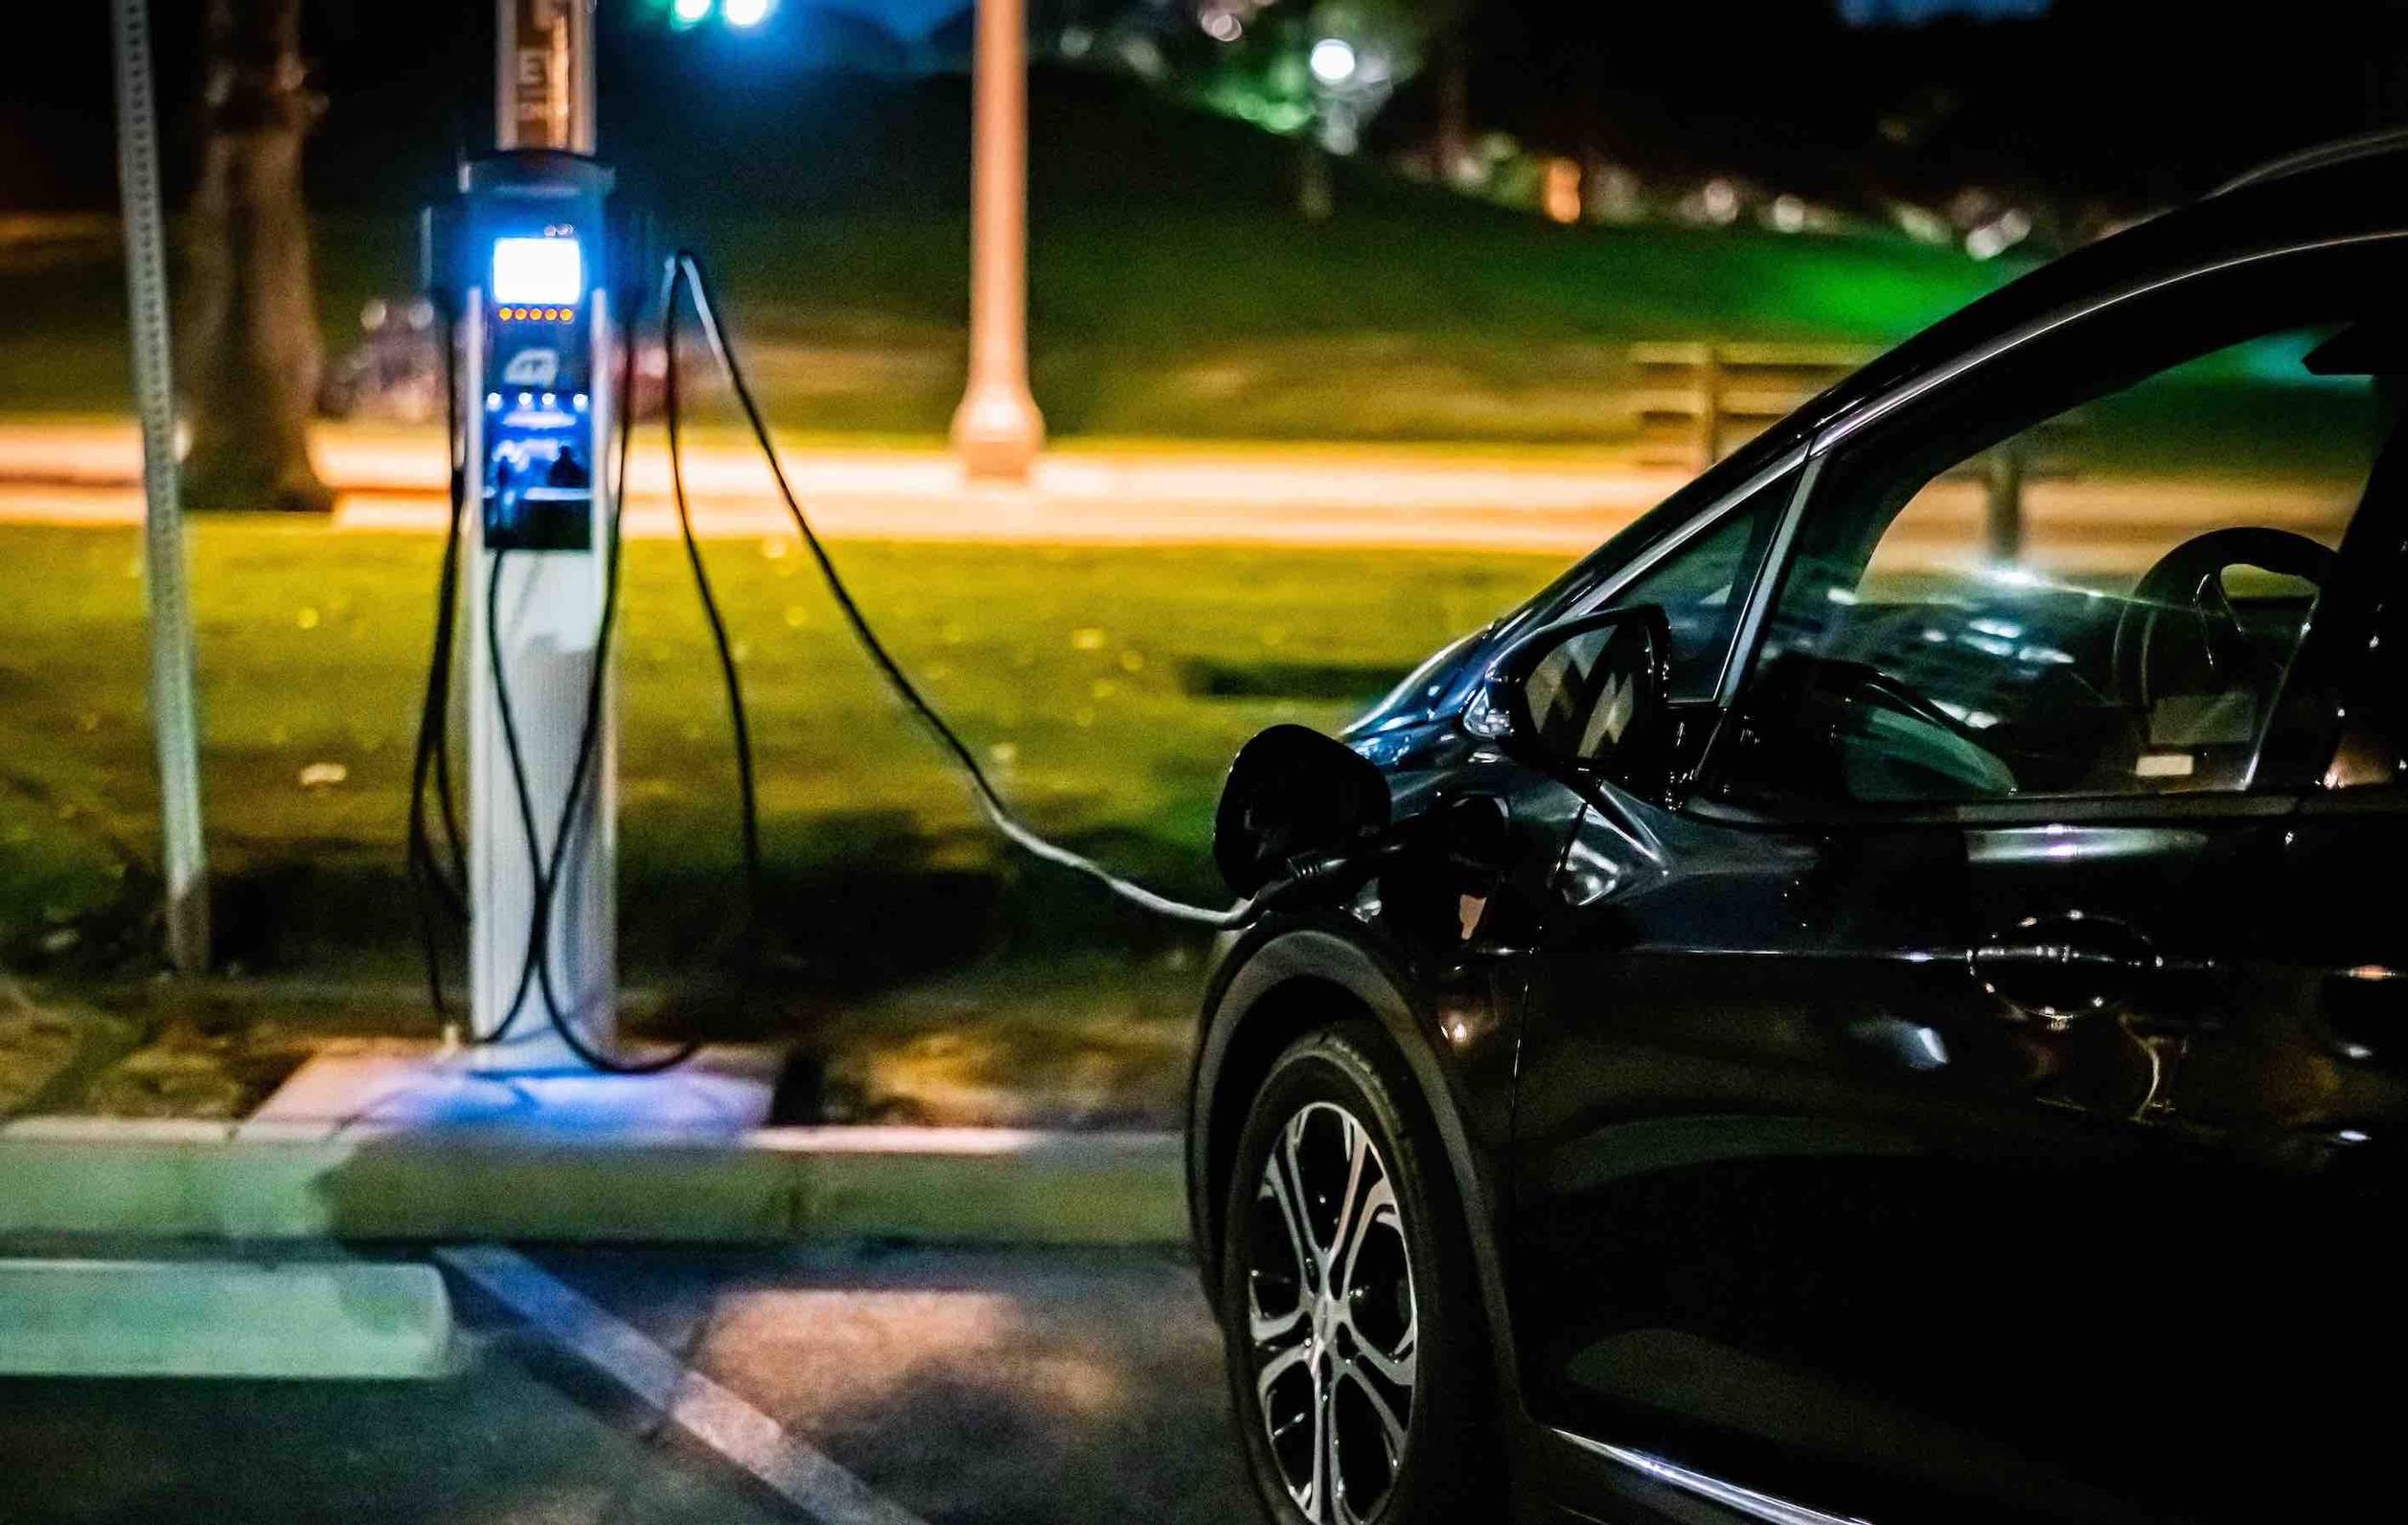 Finding the optimum locations for EV charging stations